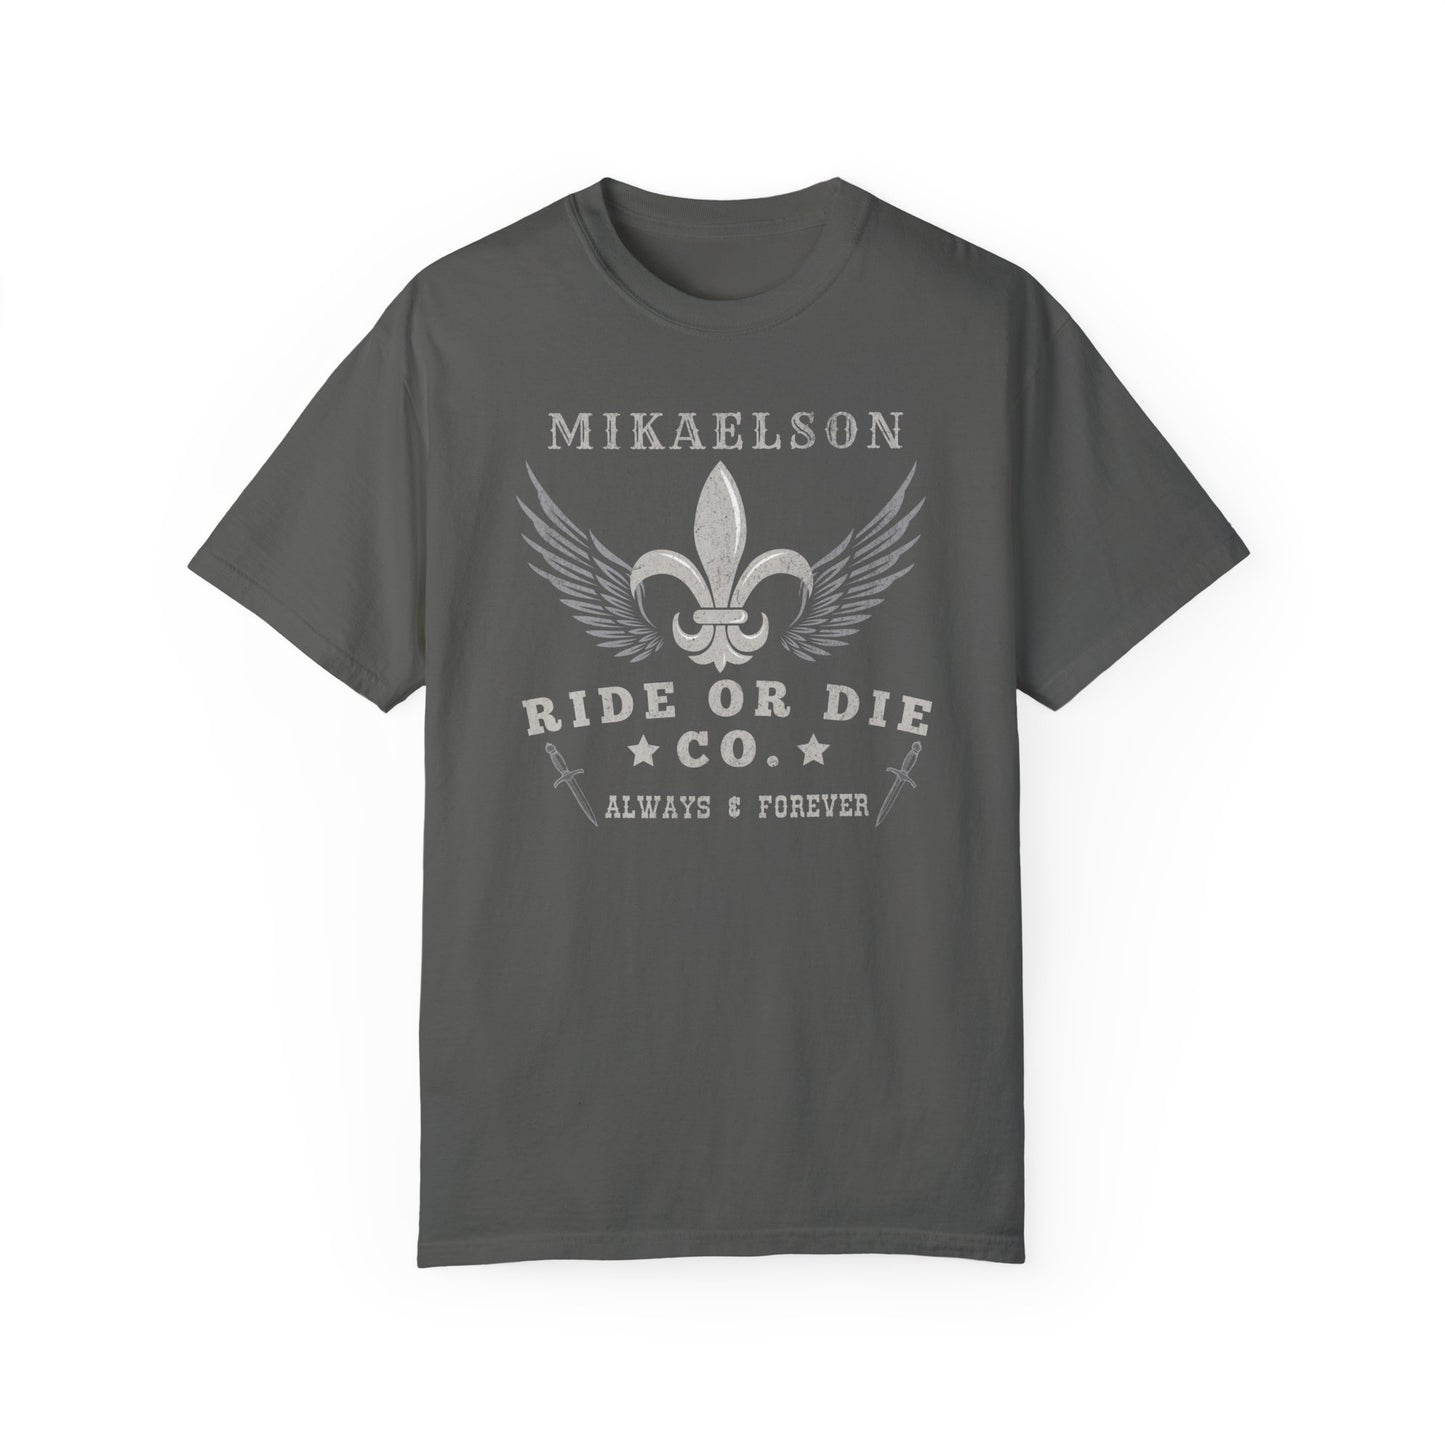 Mikaelson Ride or Die Shirt